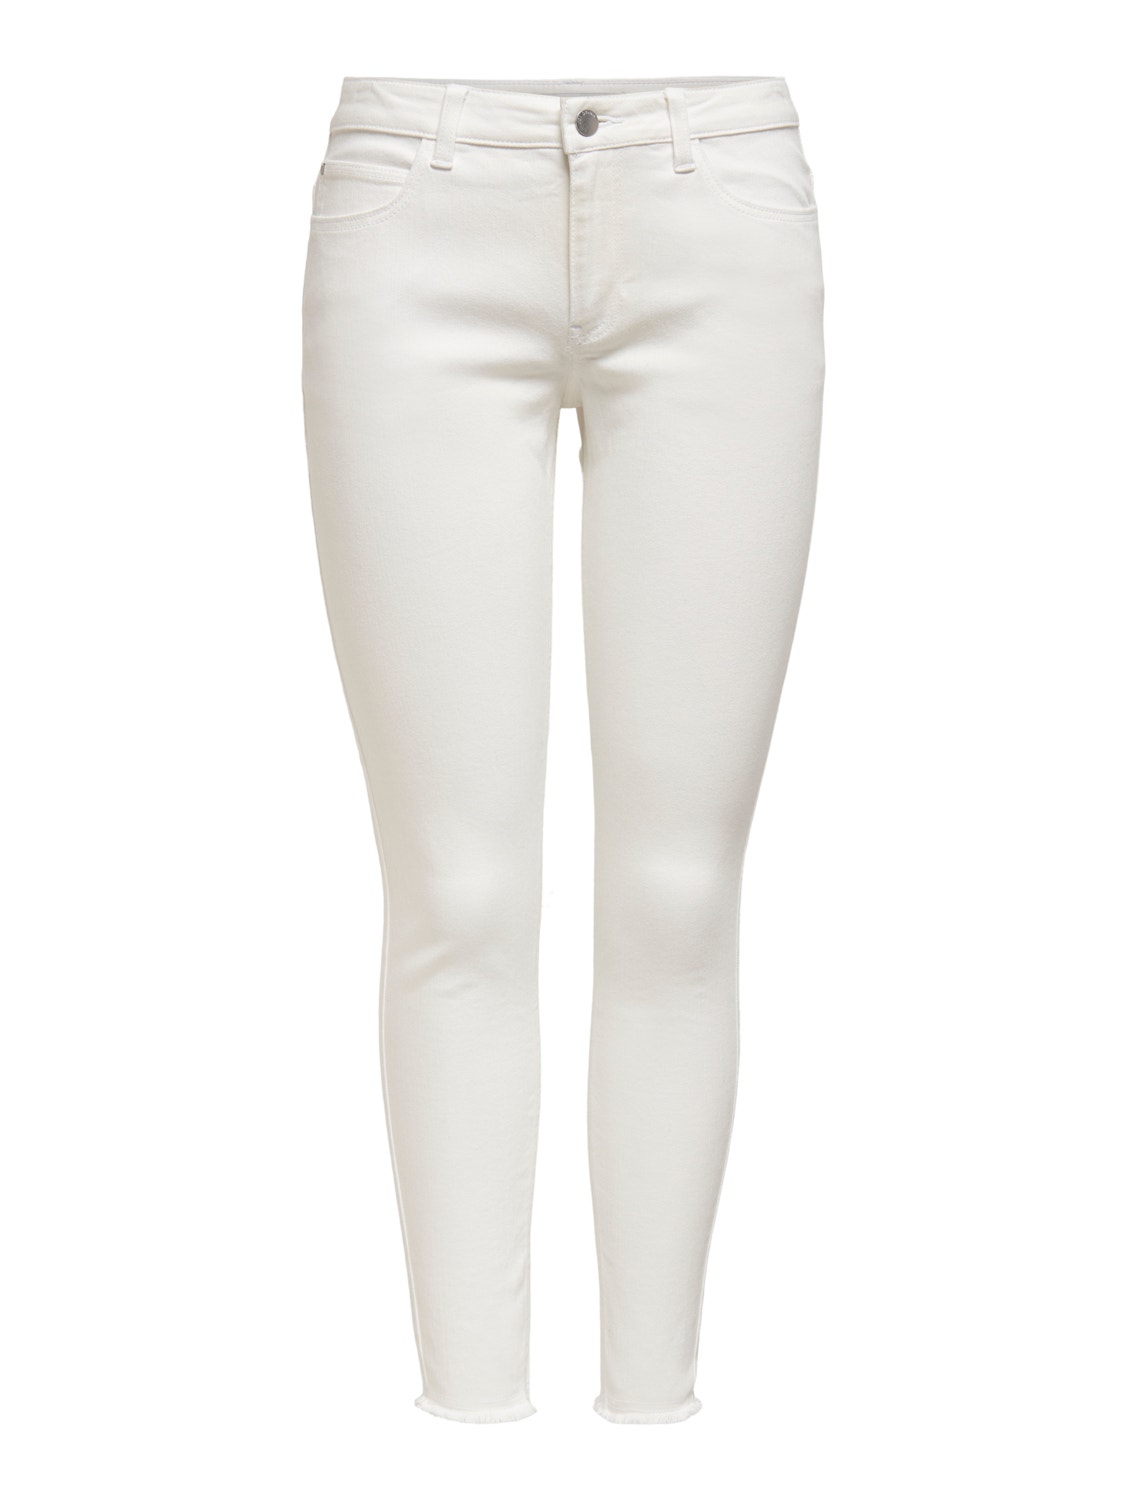 ONLY Tall JDYSonja white ankle Skinny fit jeans -White - 15258134